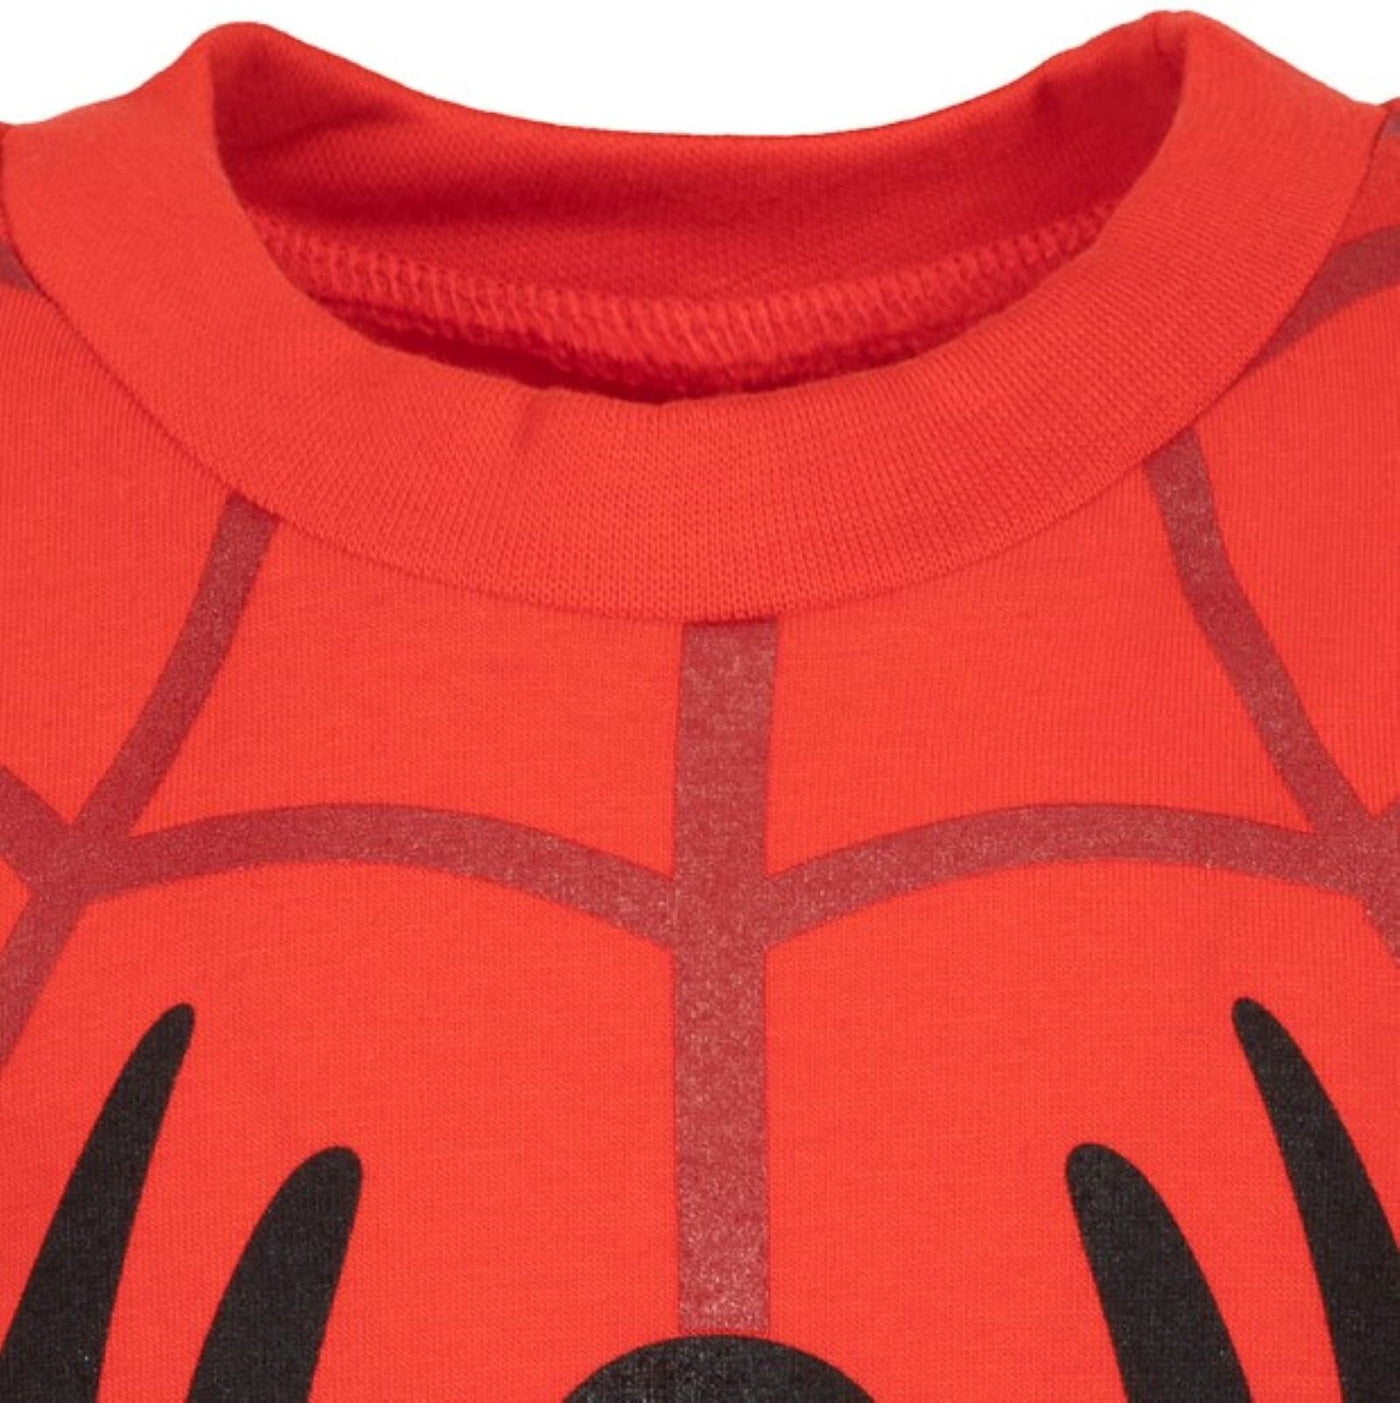 Marvel Spidey and His Amazing Friends Spider-Man T-Shirt and Mesh Shorts Outfit Set